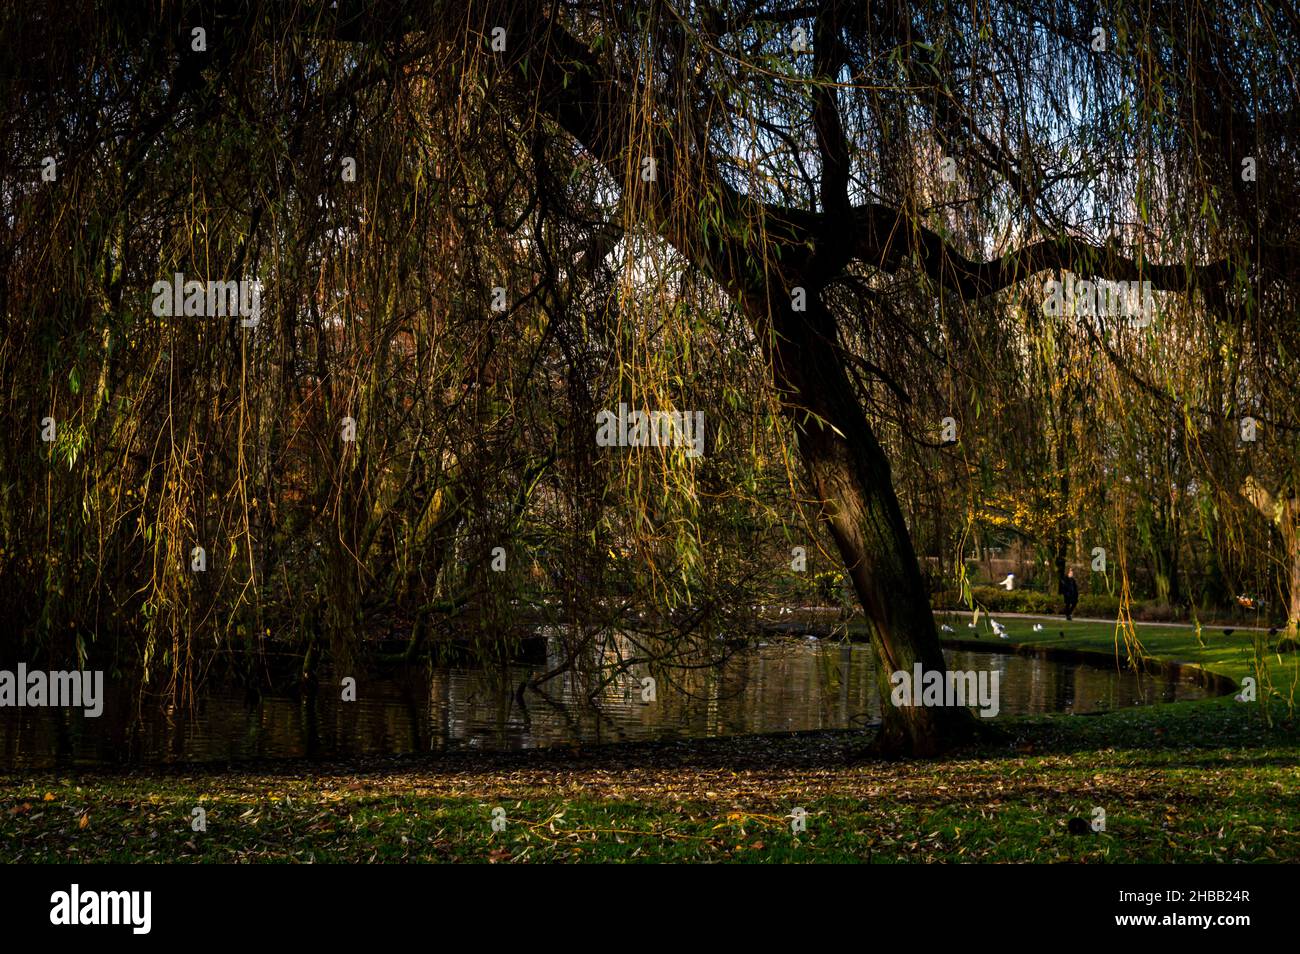 Image of a weeping willow near a city park pond in the late winter sun Stock Photo